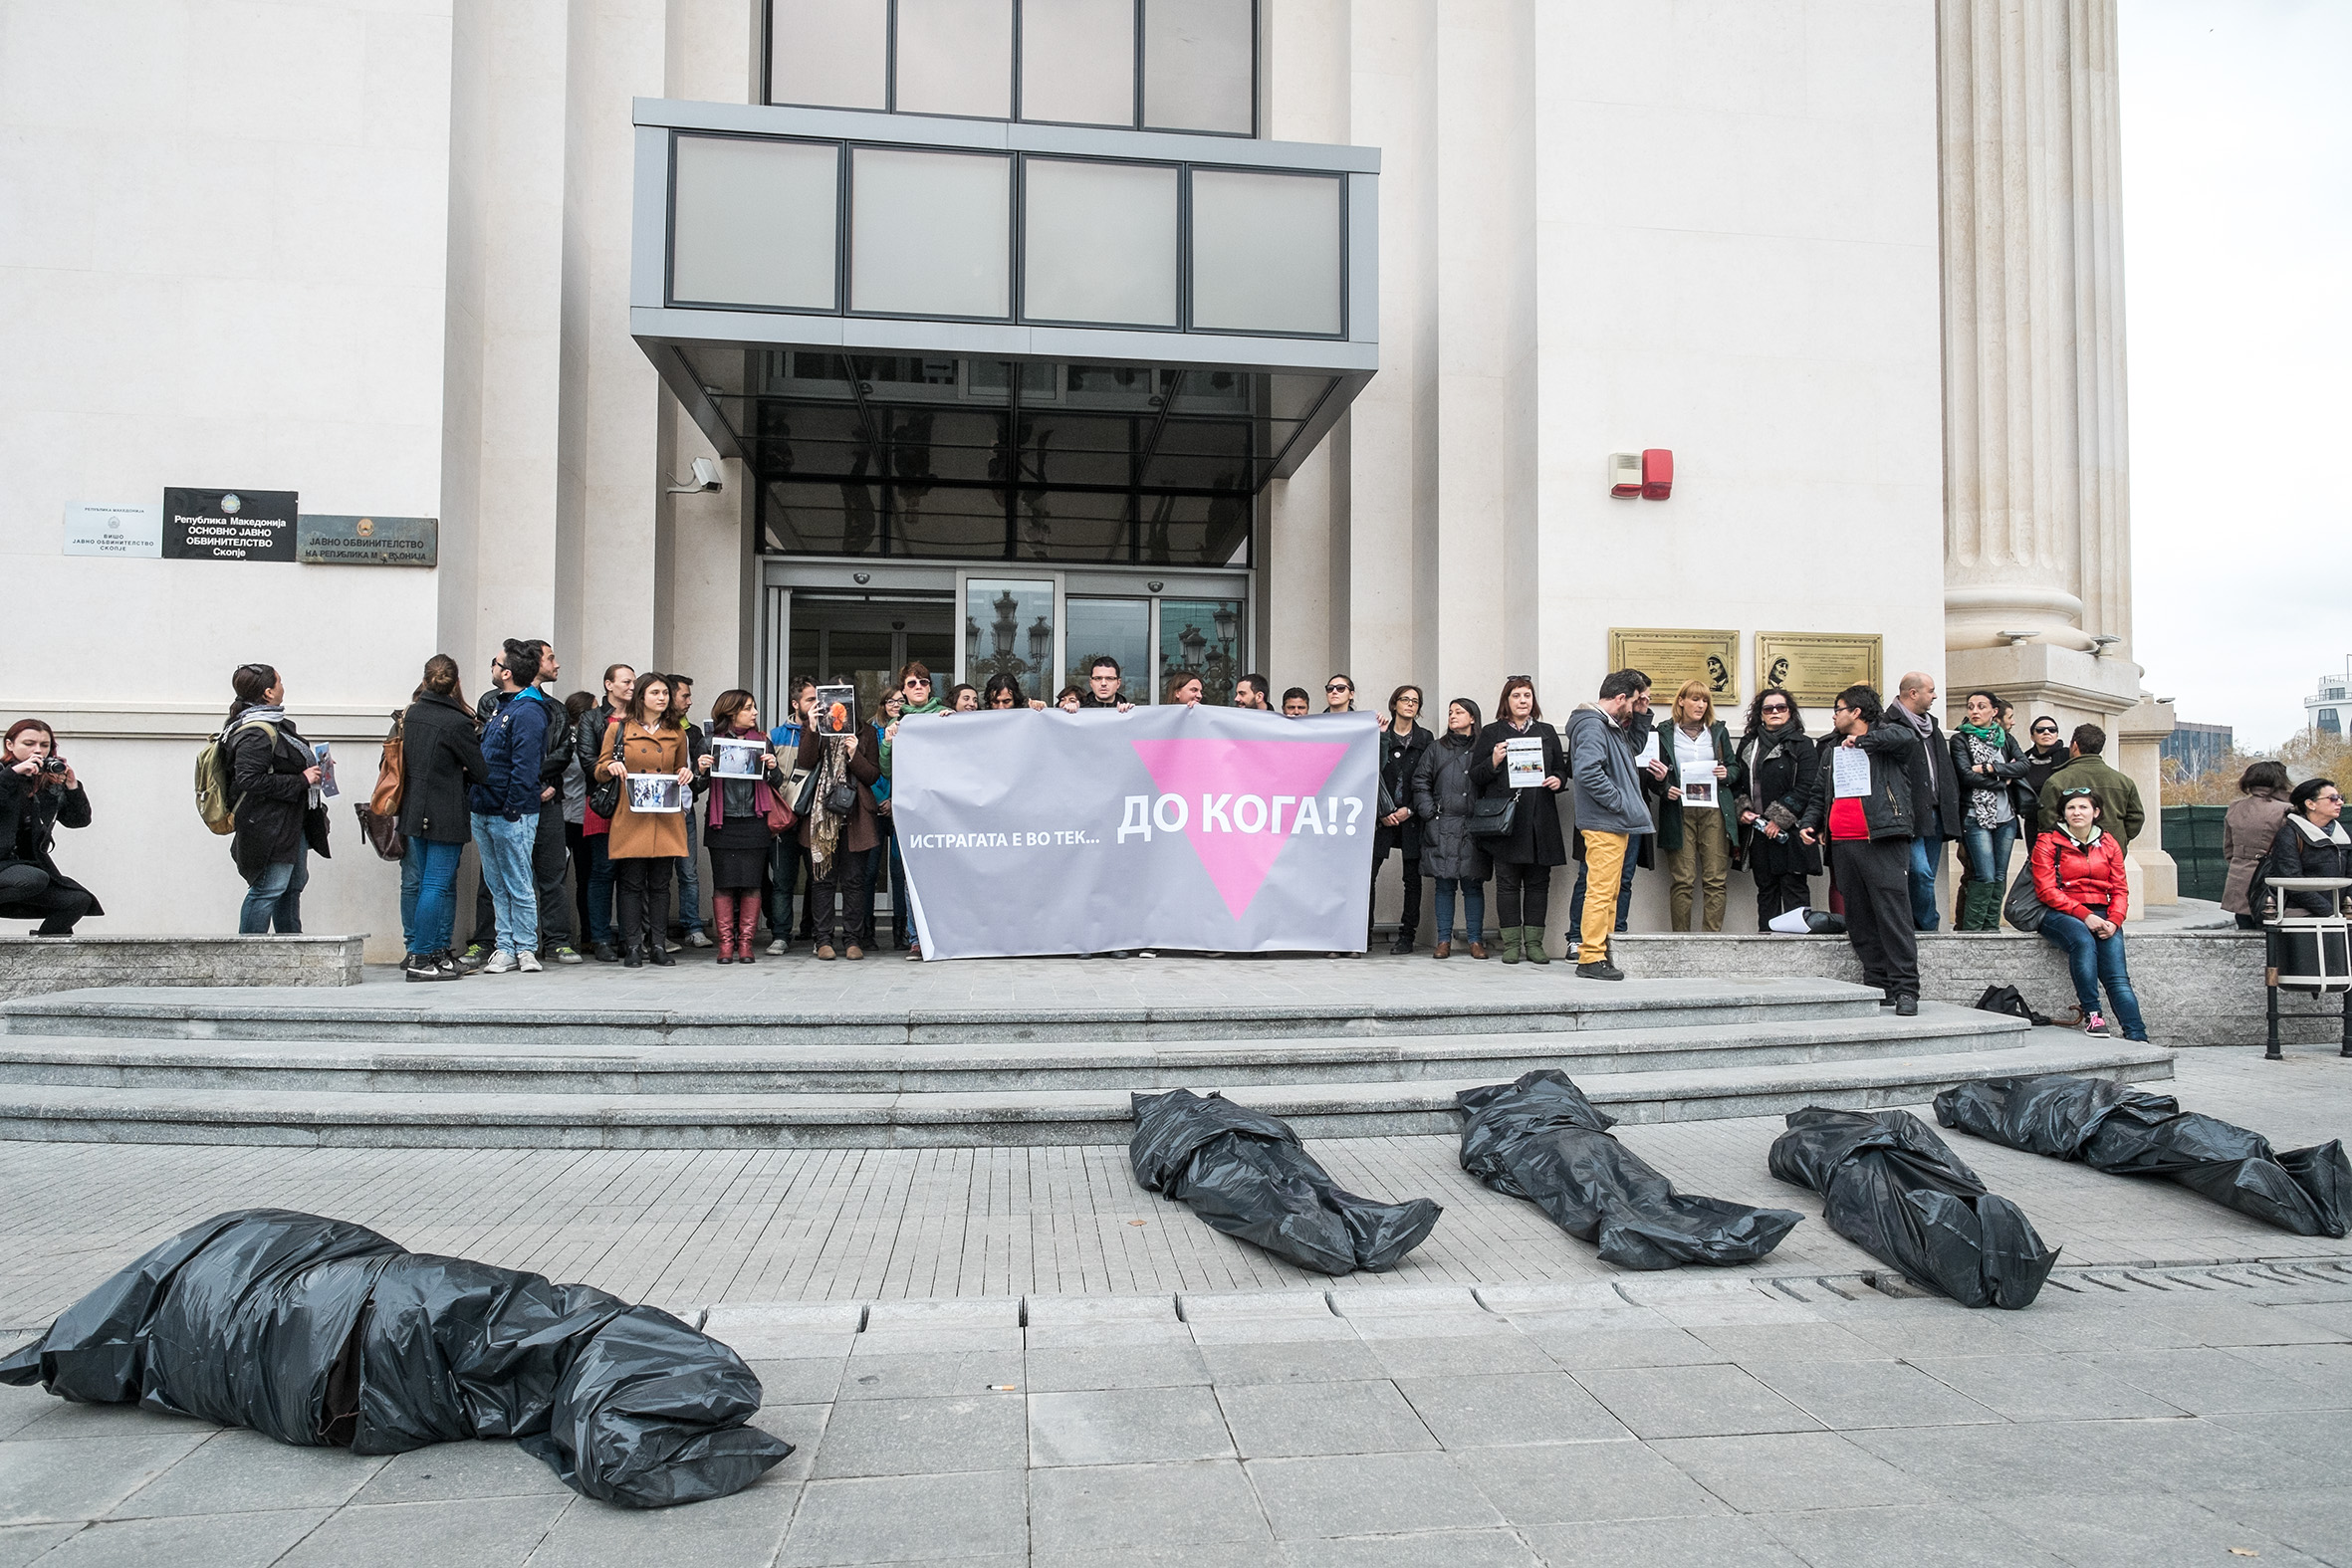 Activists in front of the office of Public Prosecutor in Skopje, Macedonia. Photo by V. Dzambaski, CC BY-NC-SA.